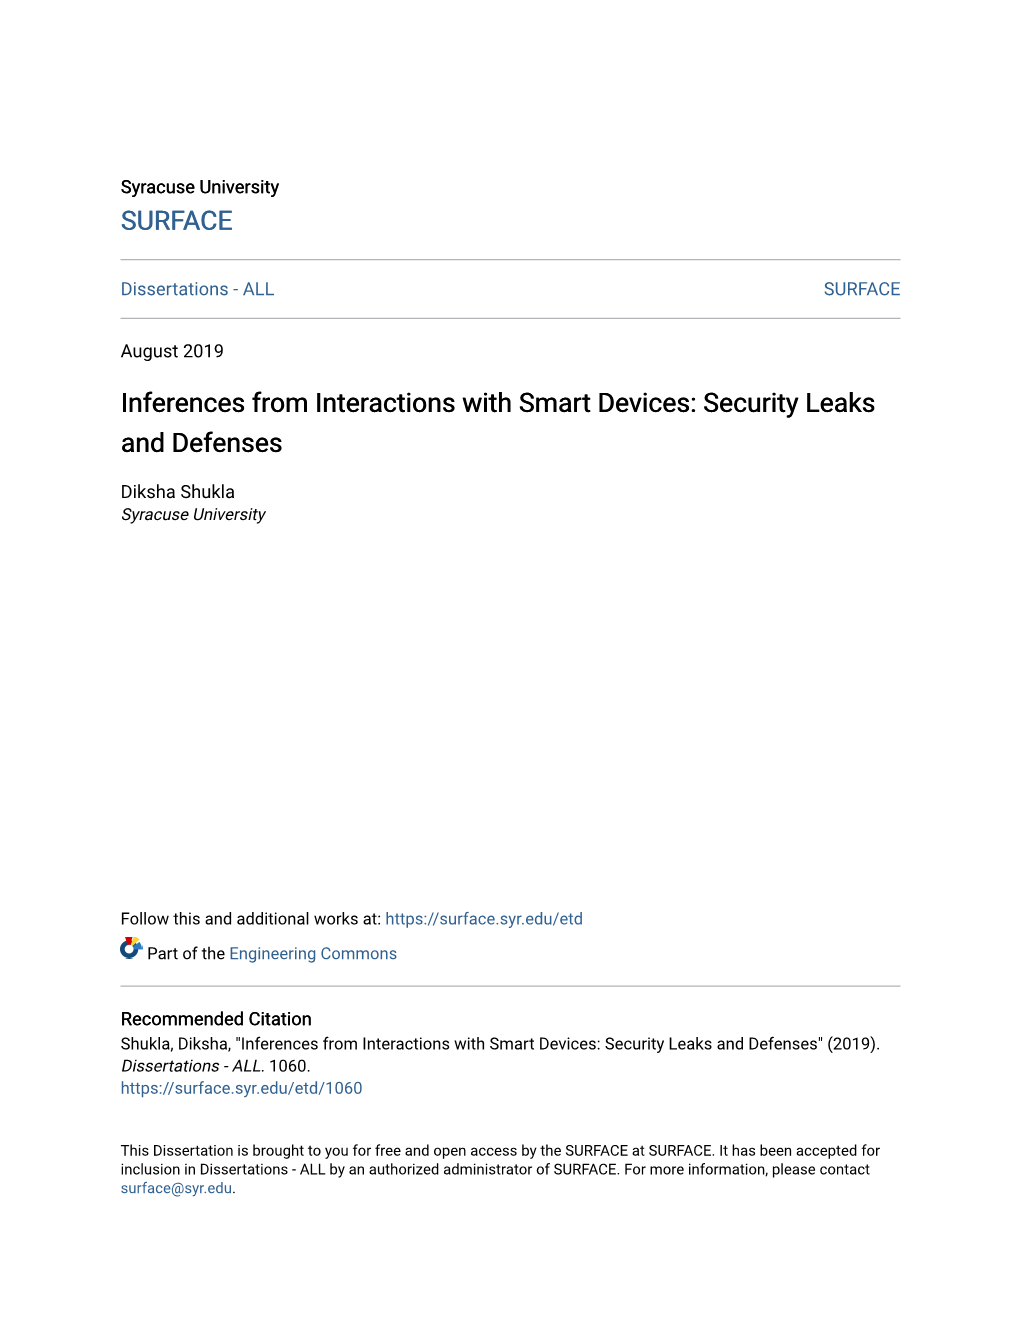 Inferences from Interactions with Smart Devices: Security Leaks and Defenses